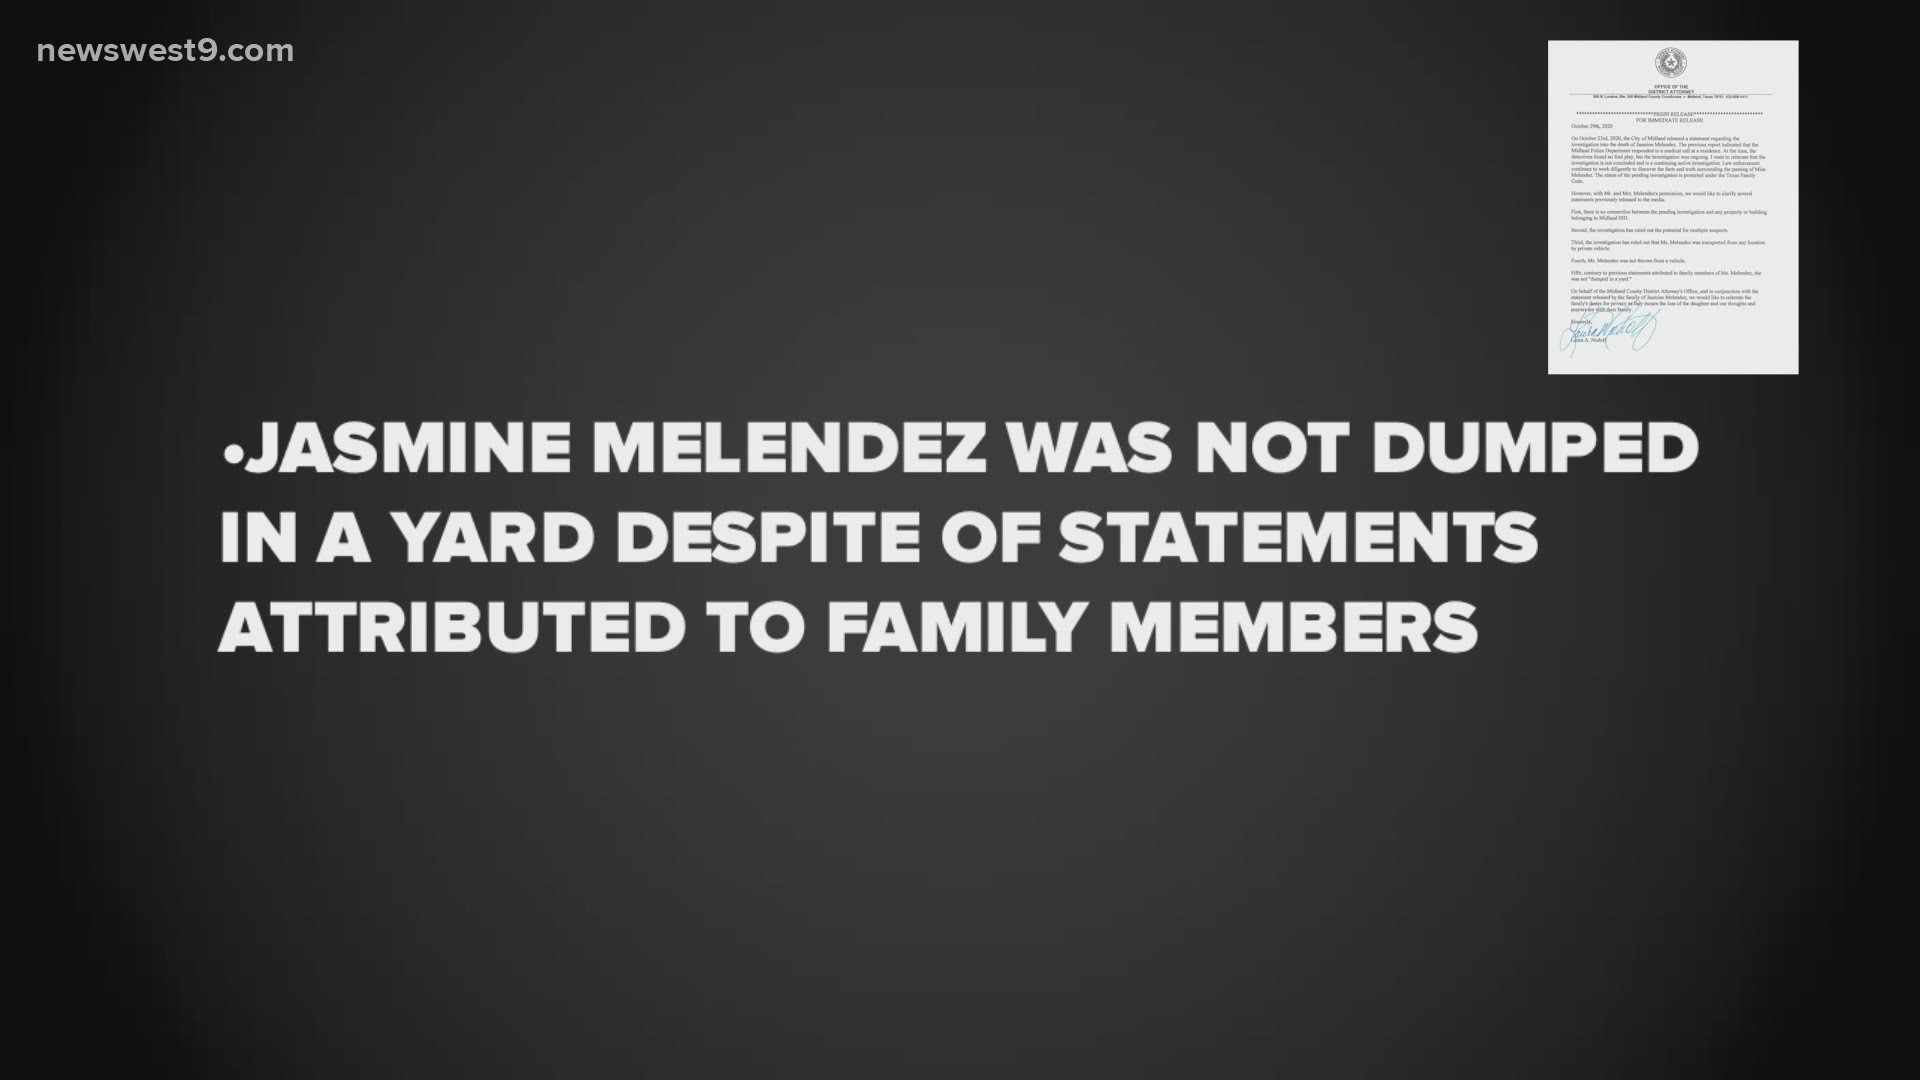 The DA's office also asked for privacy for the family mourning the loss of their daughter.